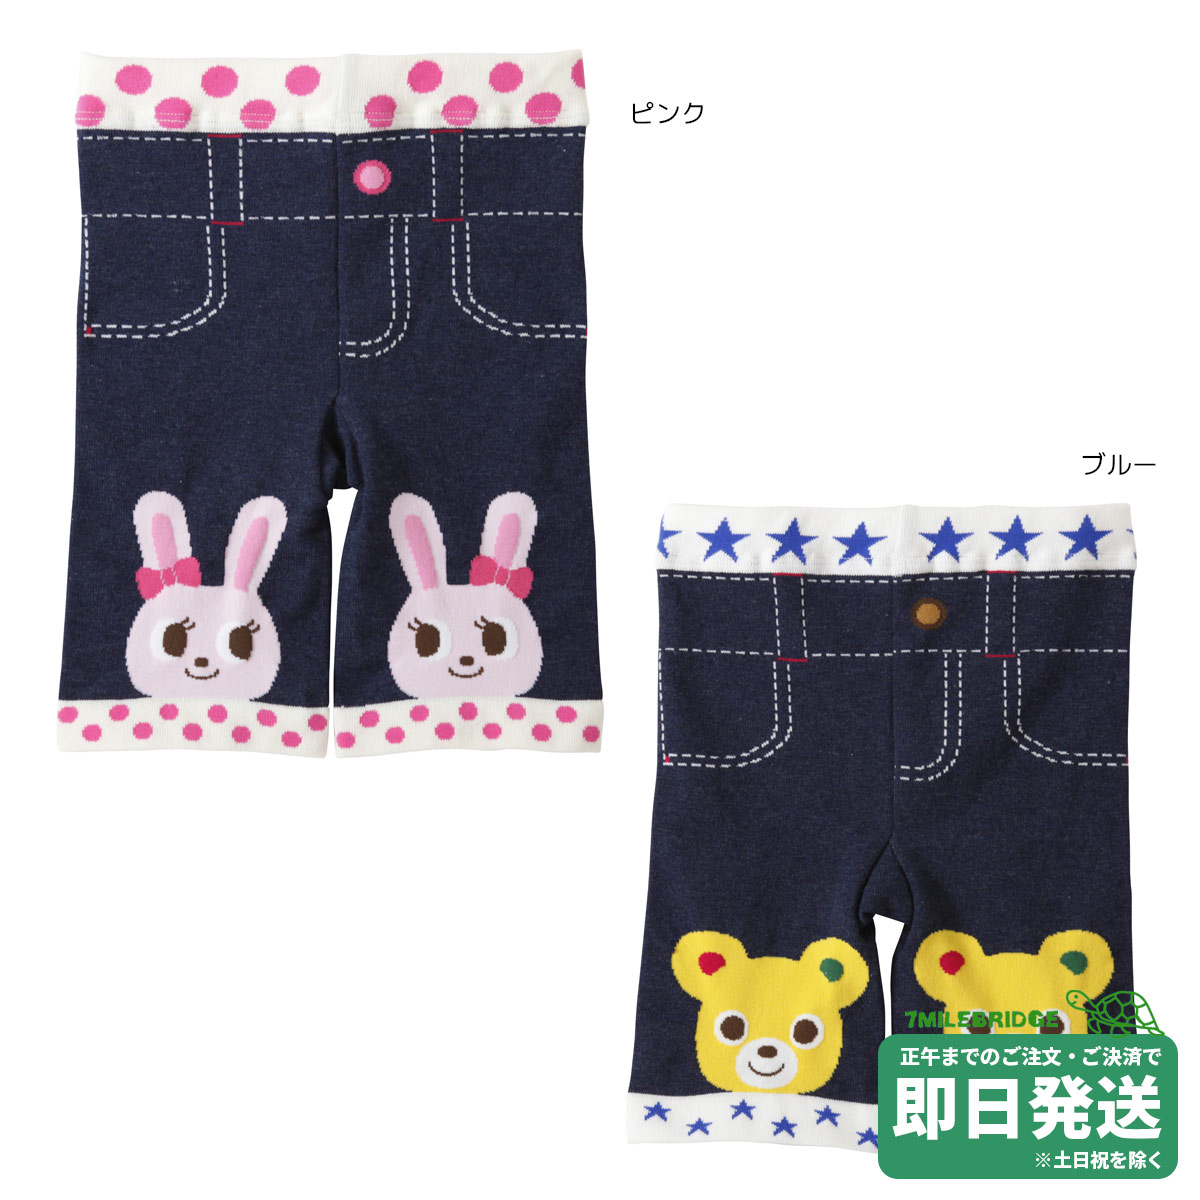  sale 30%OFF! Miki House pchi...7 minute height baby spats (80cm*90cm*100cm) Miki House regular store * mail service OK